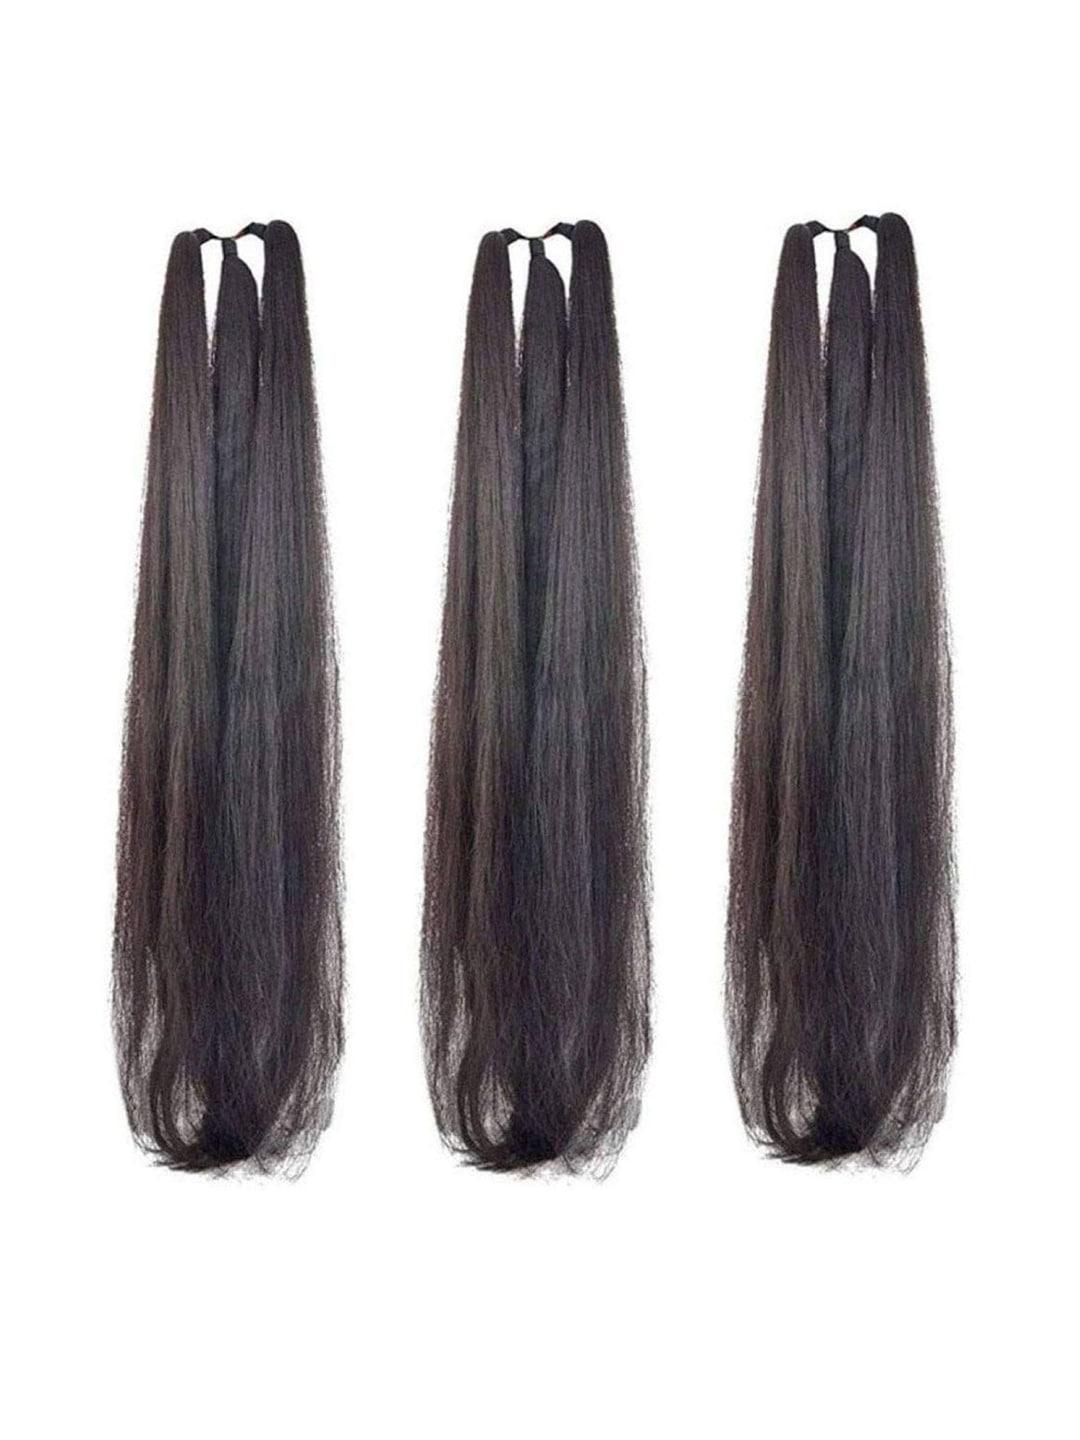 CHANDERKASH Set Of 3 Synthetic Hair Extension